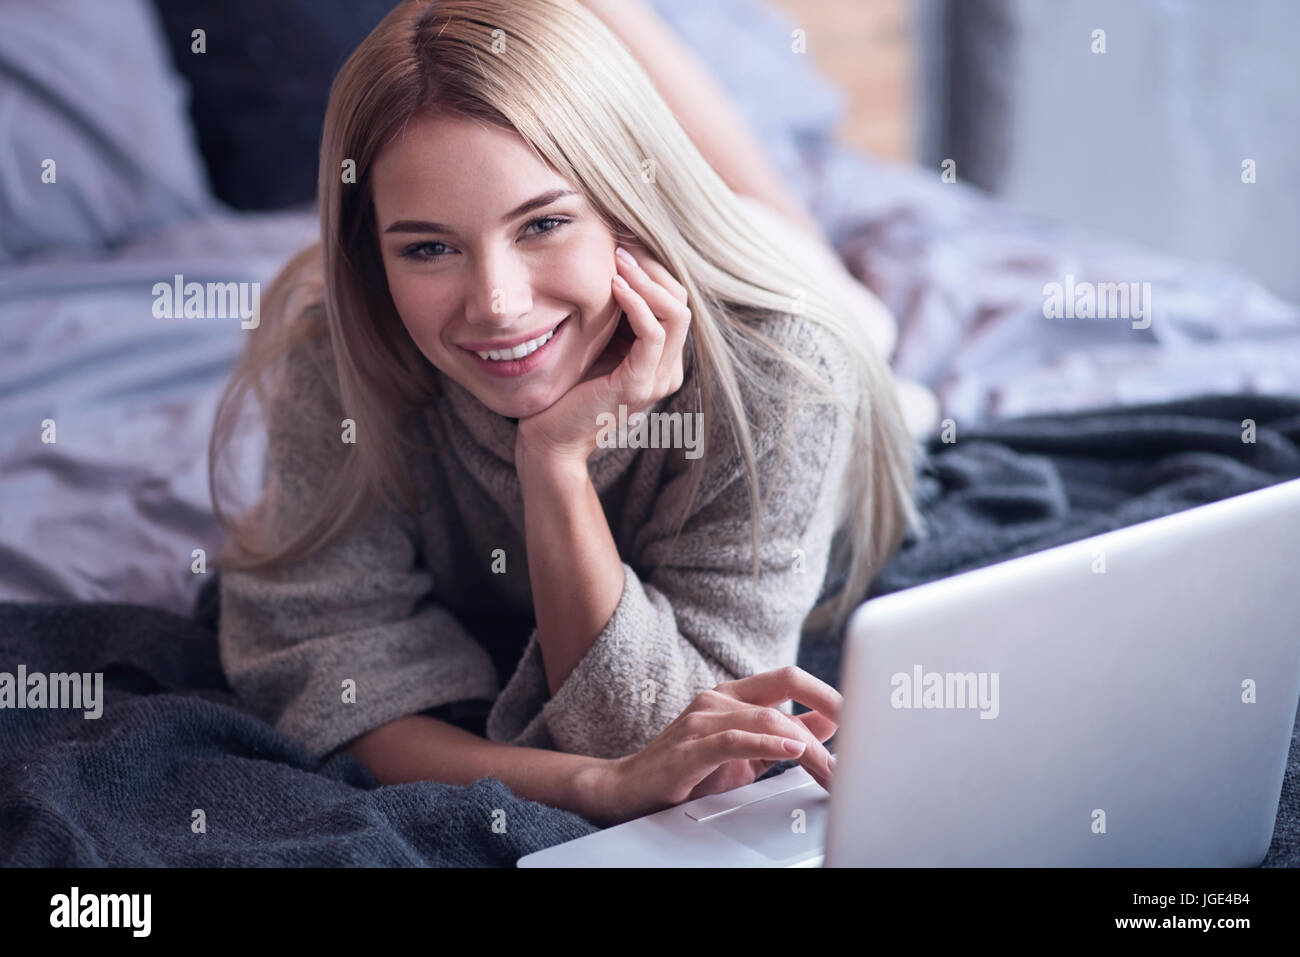 Cheerful young woman enjoying freelance work at home Stock Photo